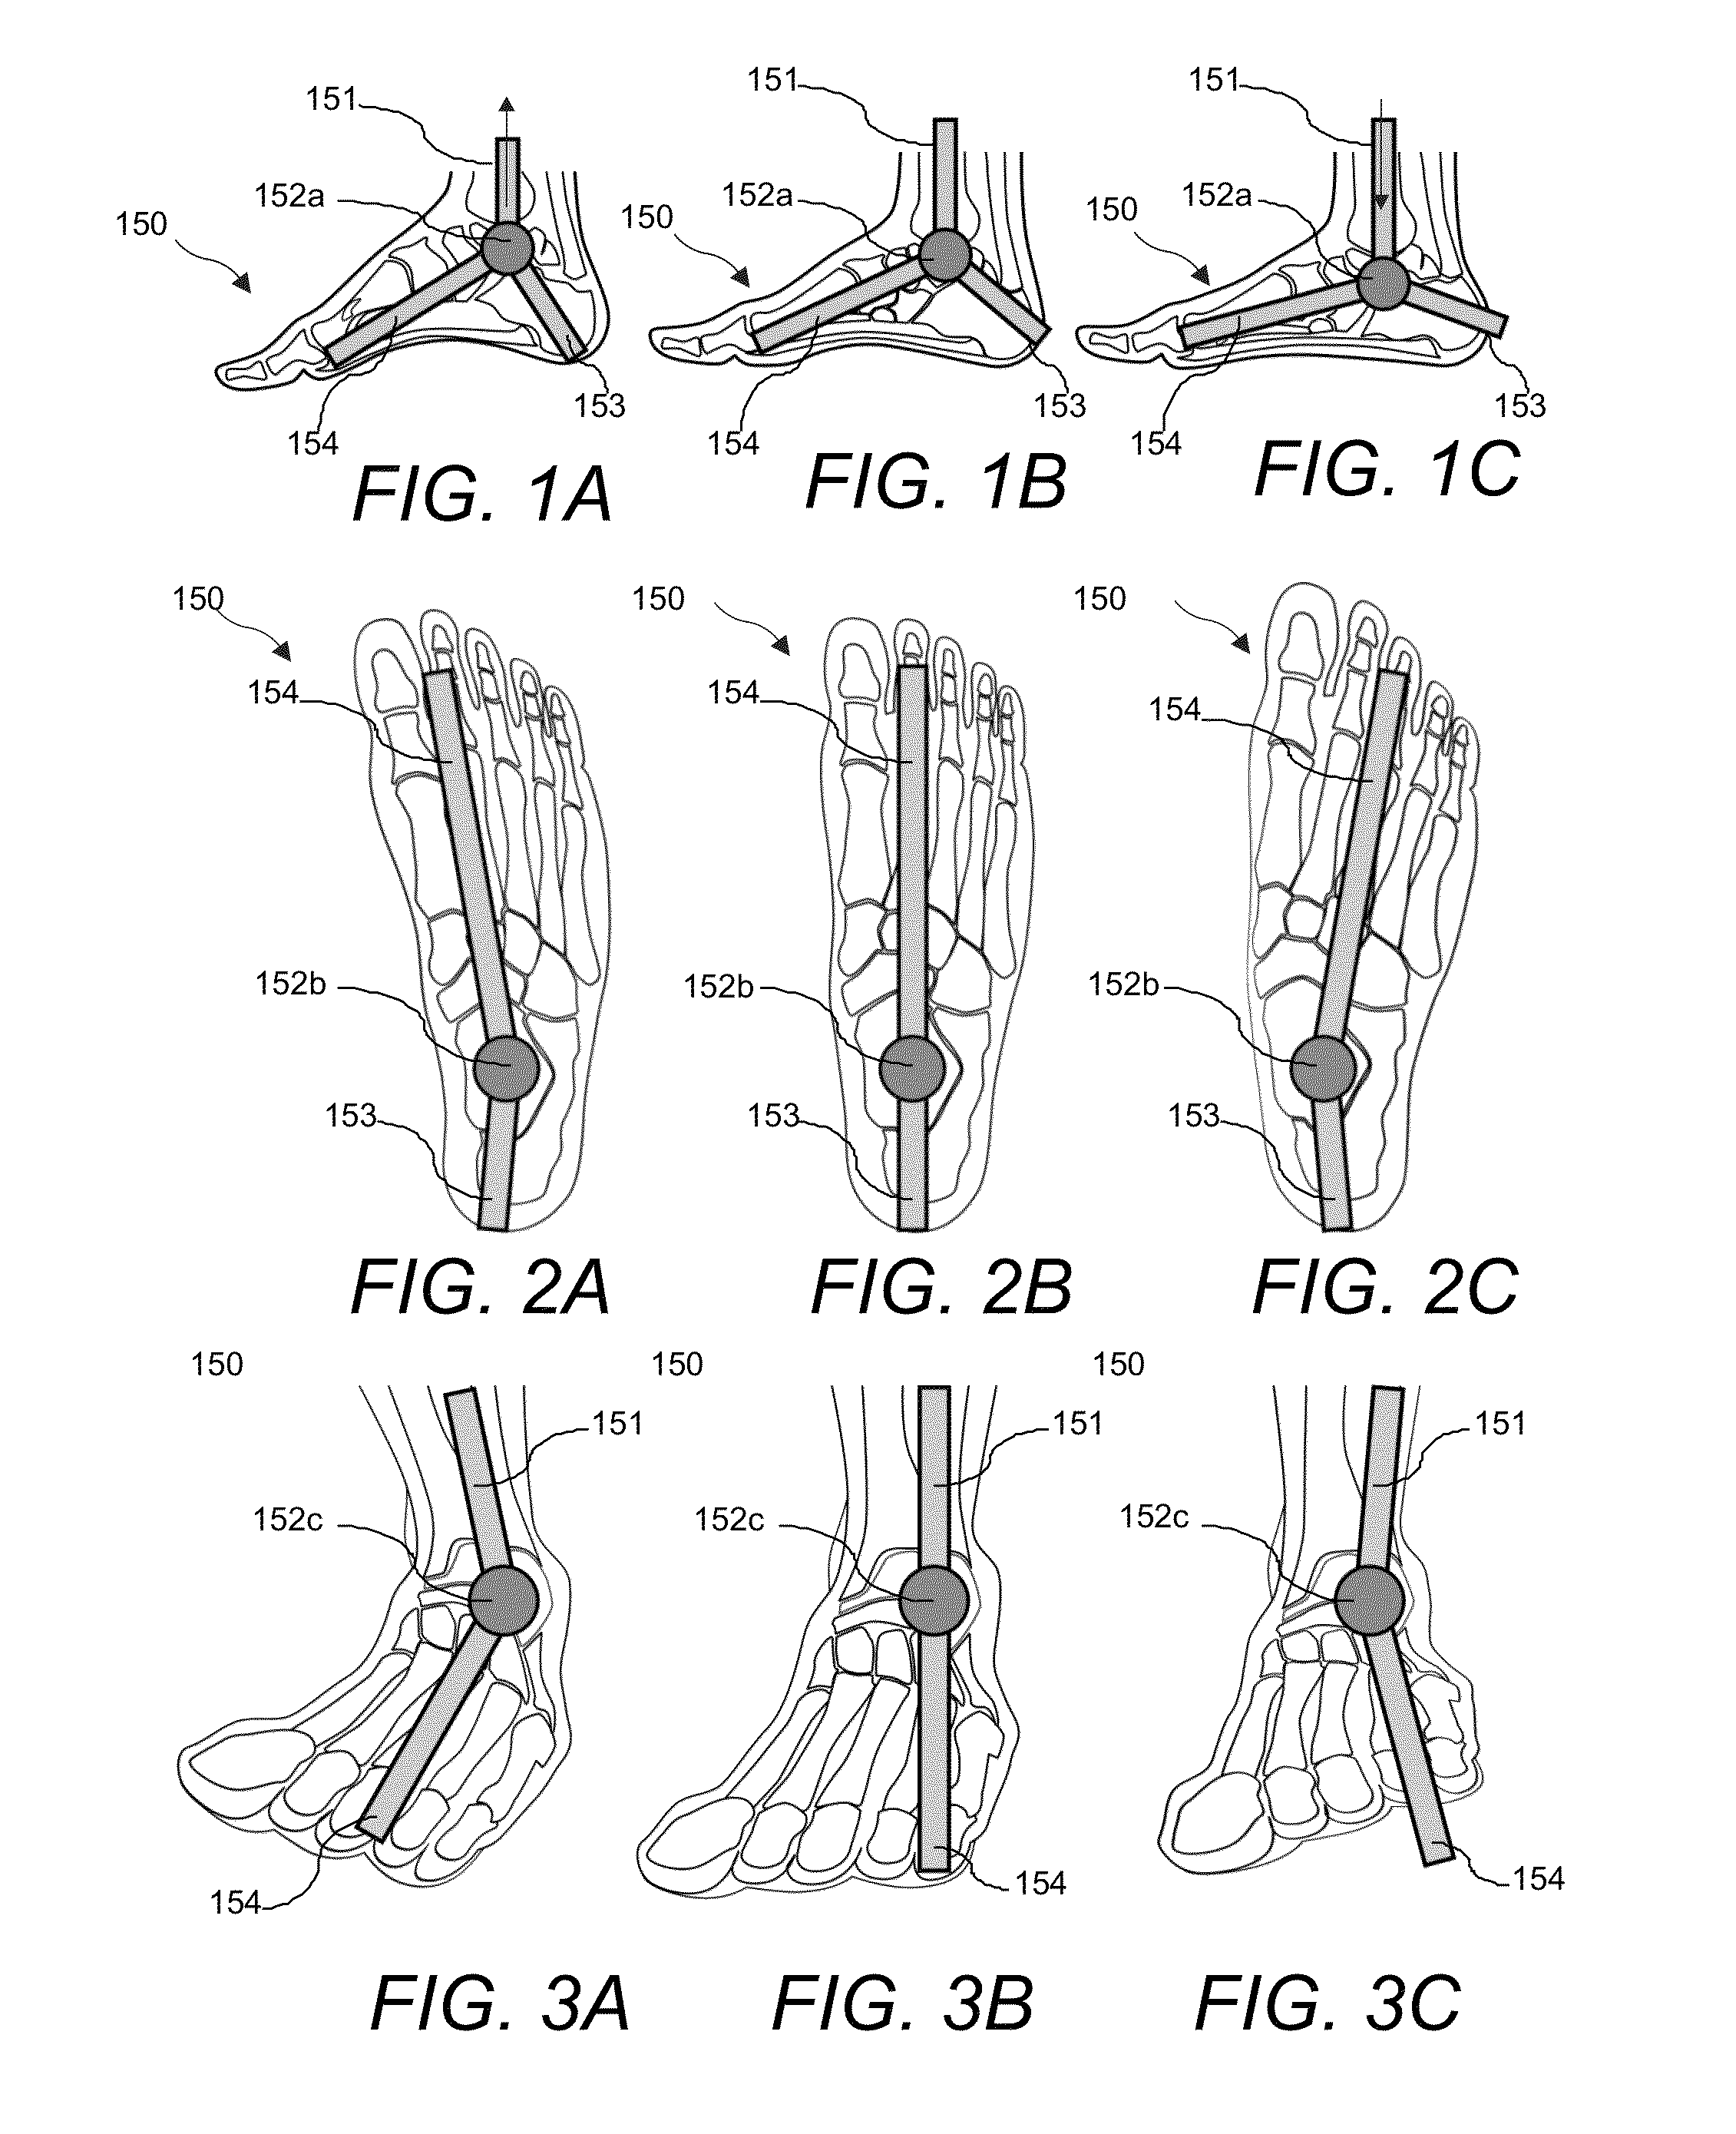 Article of footwear with embedded orthotic devices